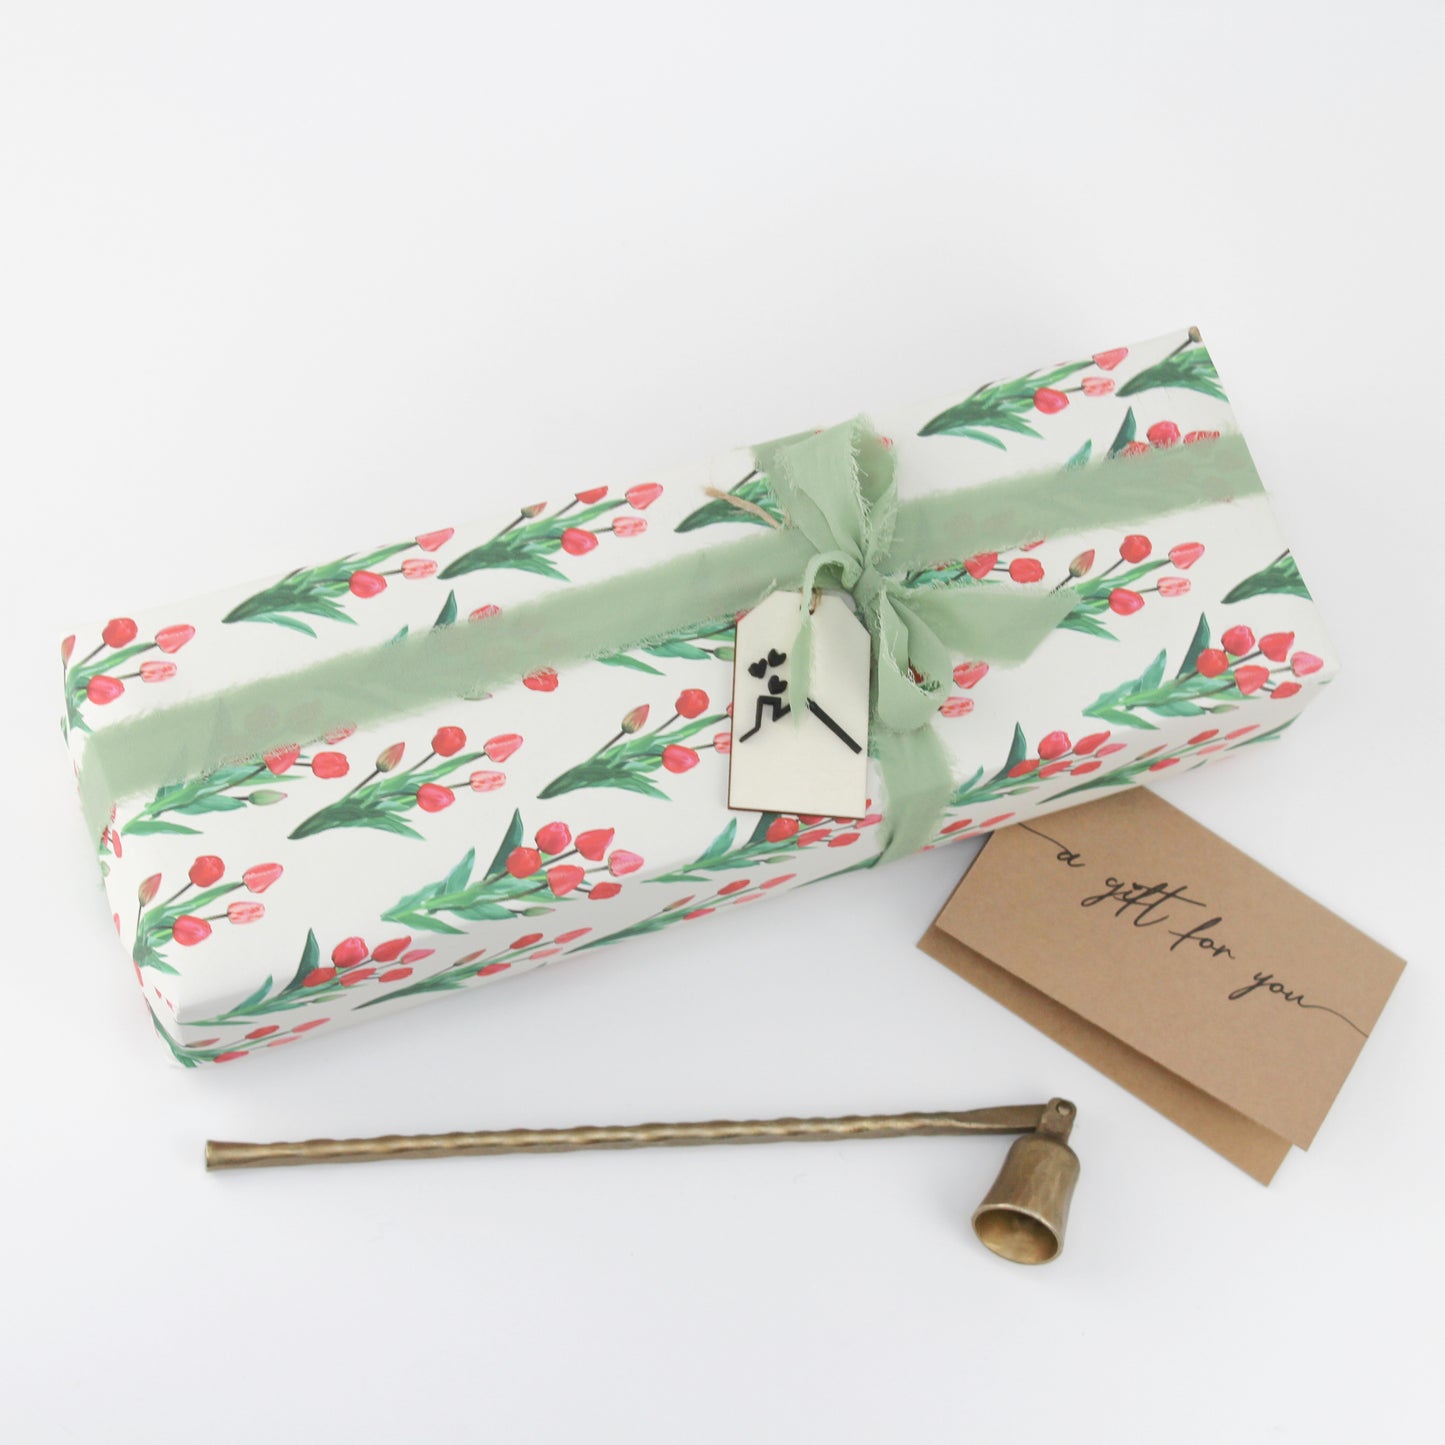 Add Gift Wrapping option to your gift giving experience, we have a wide range of gift wrapping paper to choose from